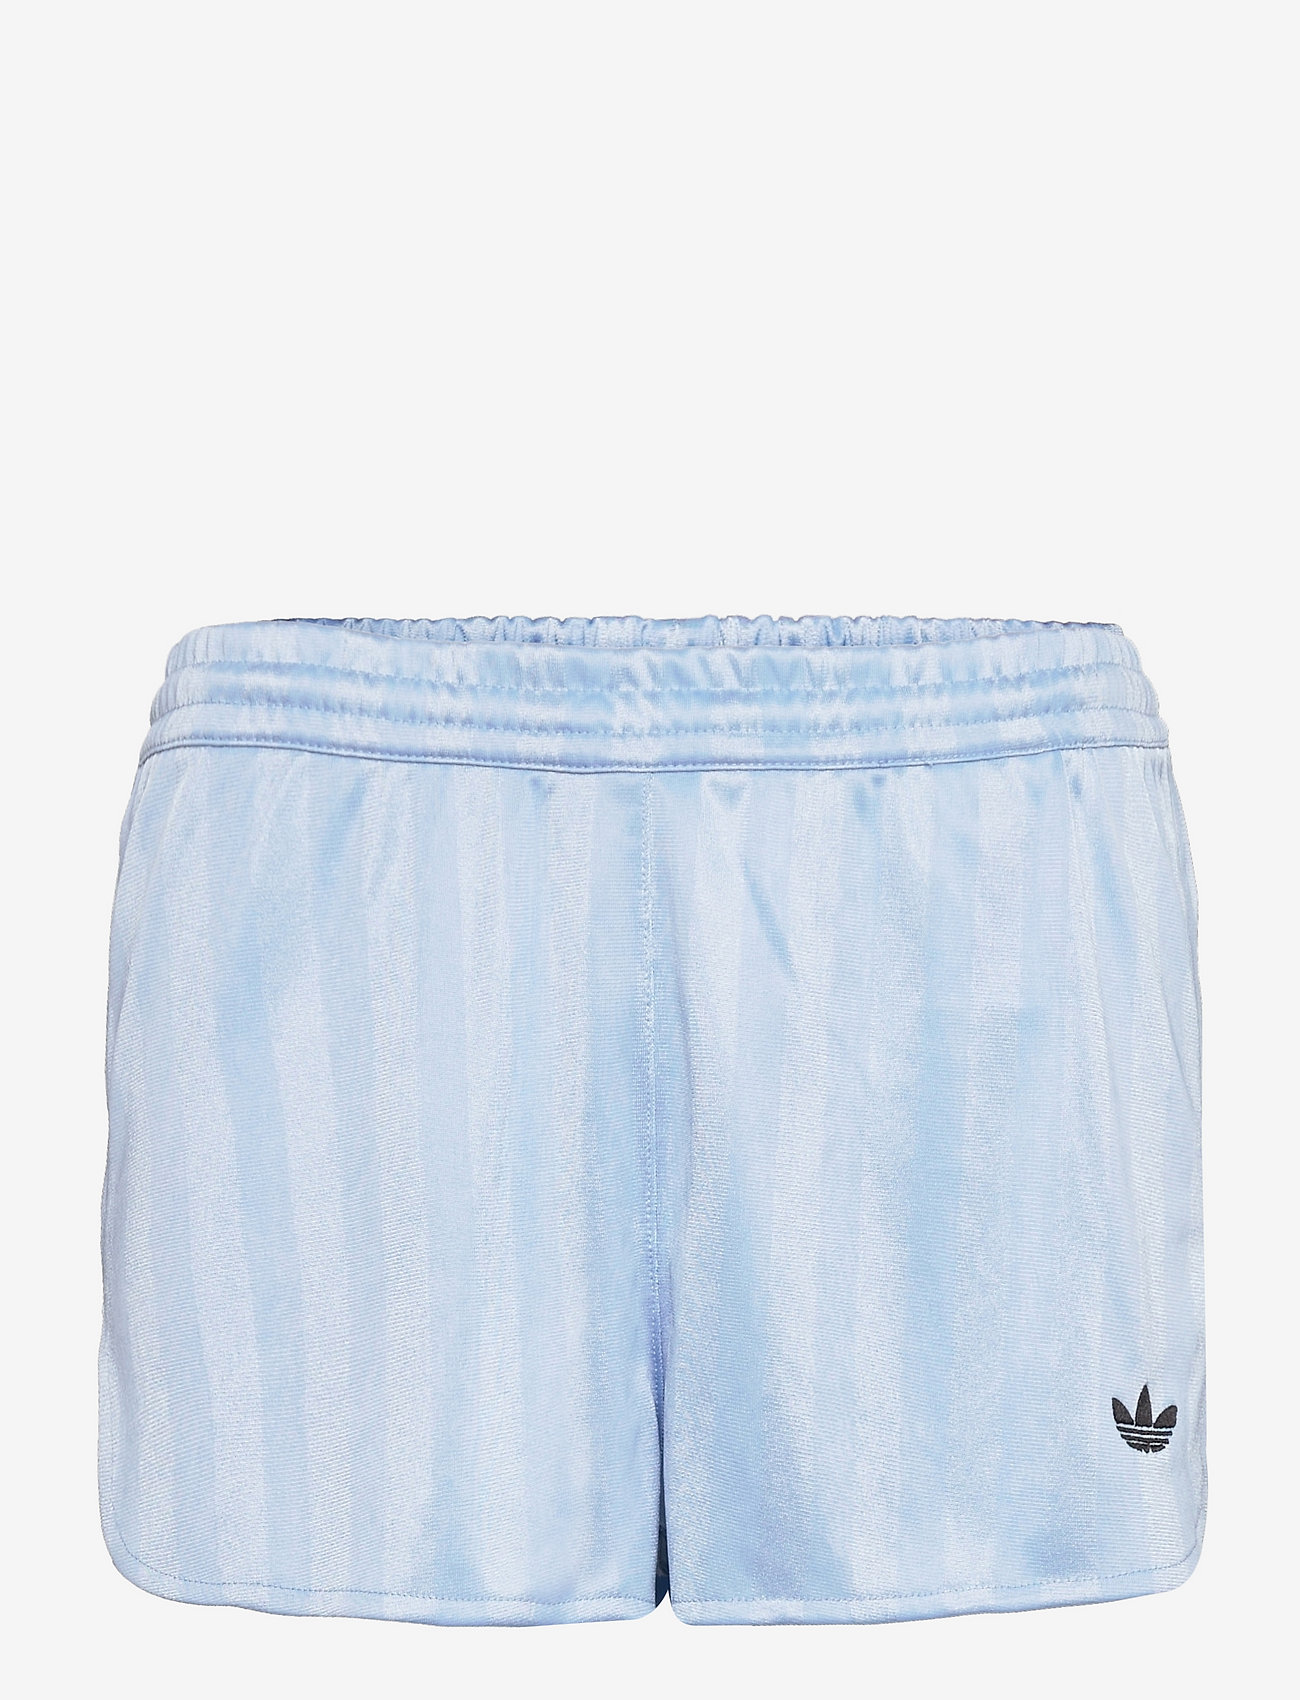 adidas Originals - Striped Shorts W - lowest prices - ambsky - 0